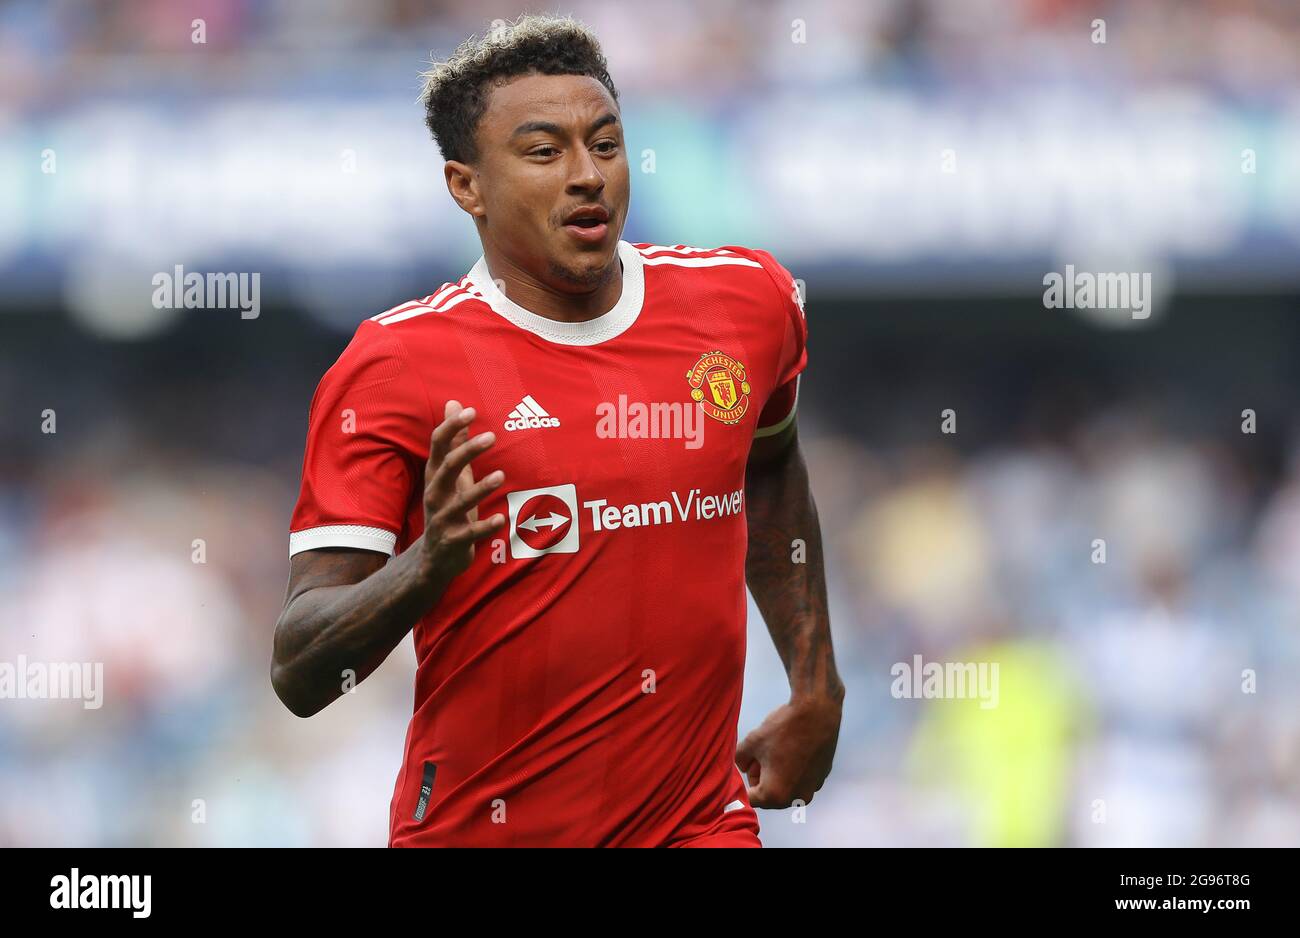 London, England, 24th July 2021. Manchester UnitedÕs Jesse Lingard during the Pre Season Friendly match at The Kiyan Prince Foundation Stadium, London. Picture credit should read: Paul Terry / Sportimage Stock Photo